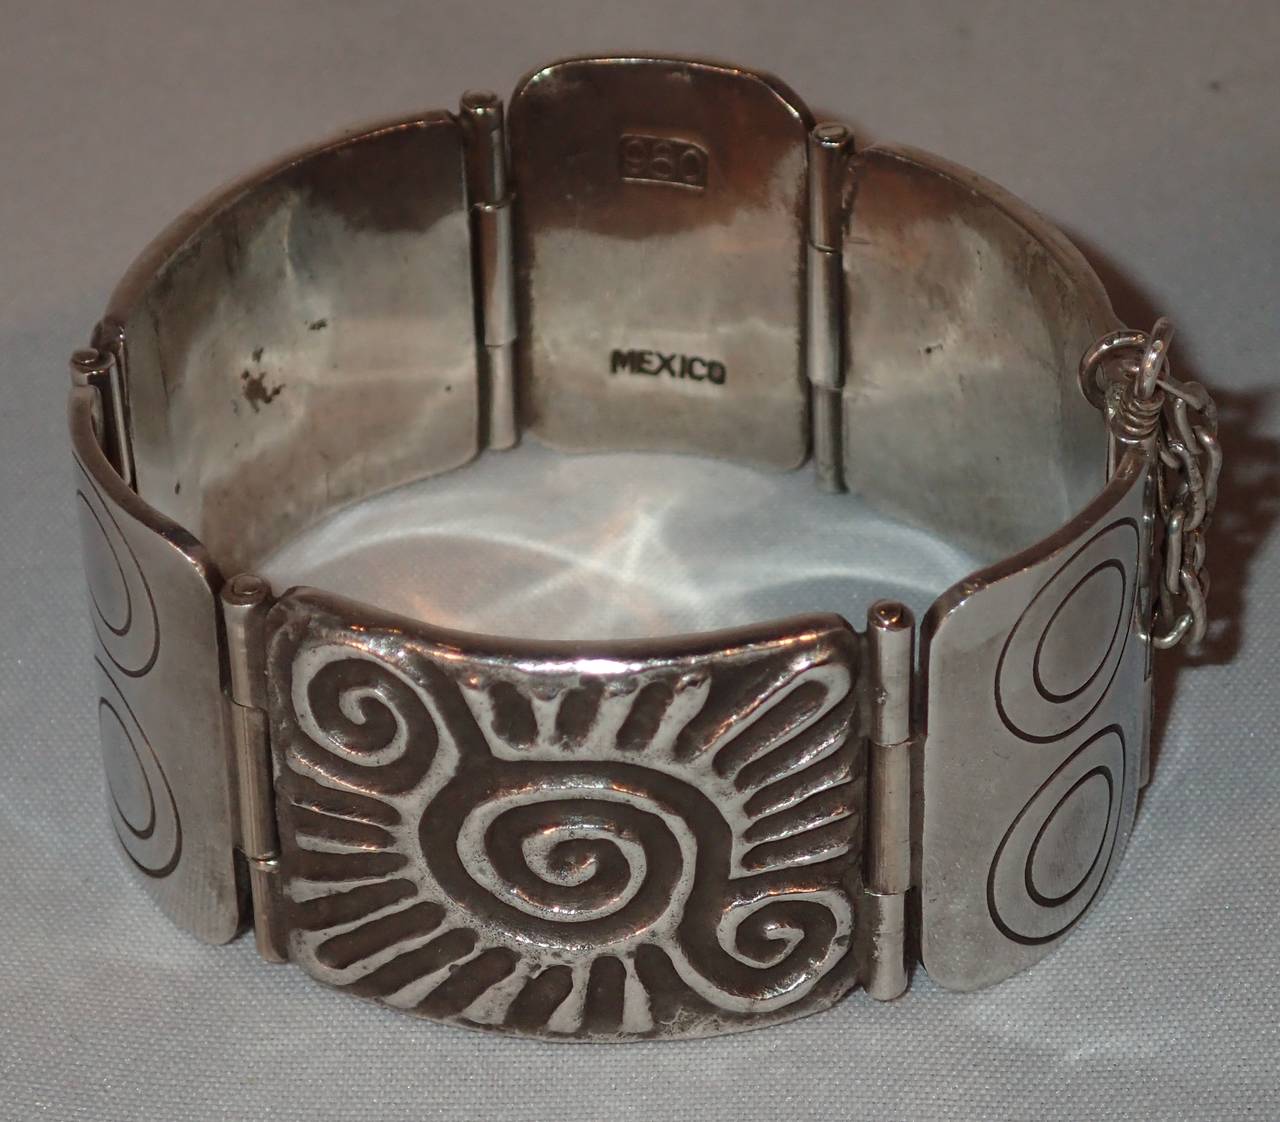 A substantial silver pane and hinge style cuff bracelet with pin latch closer by William Spratling. Formed alternating etched and repoussed panes featuring the swirl glyph design with alternating multi-ring circles motif, clasped together with a